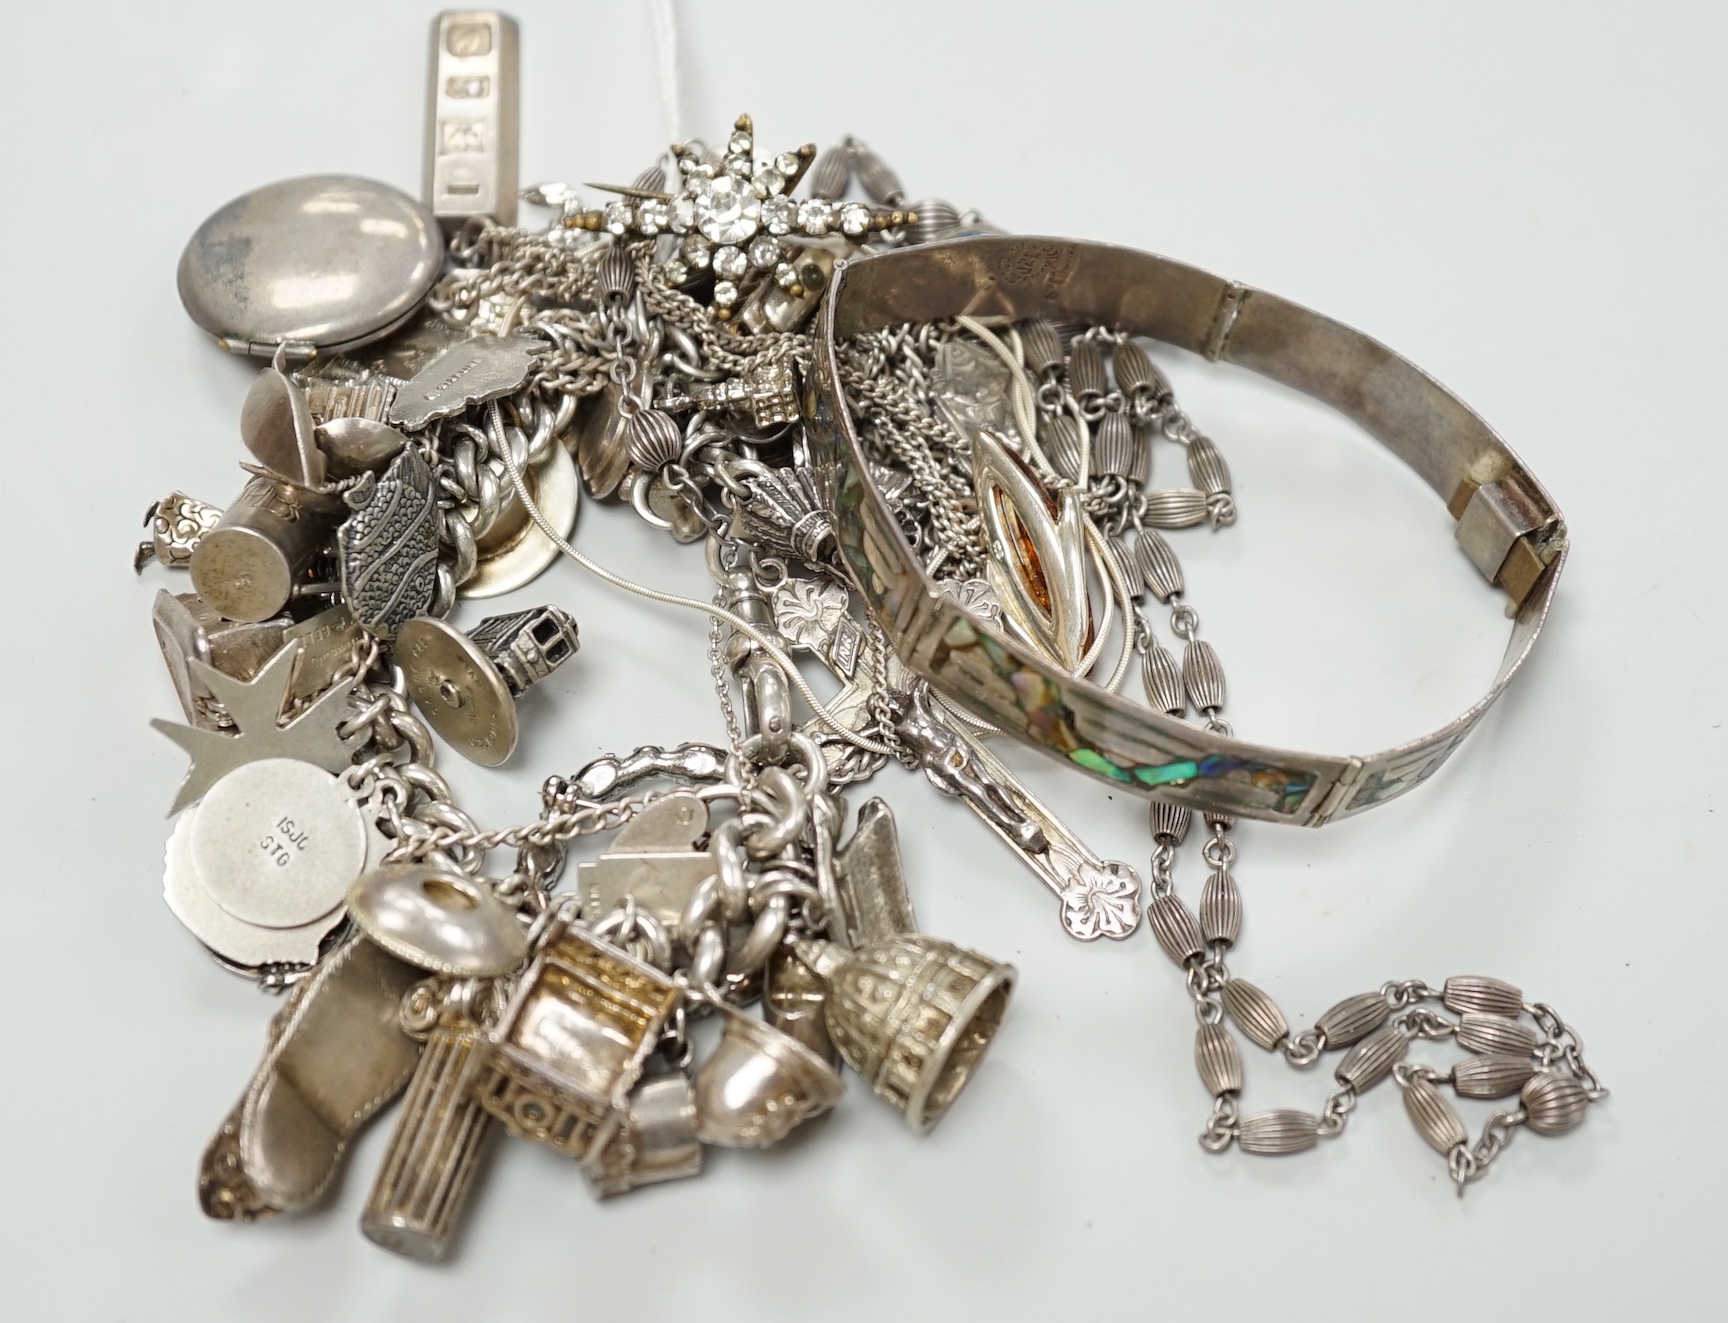 A silver charm bracelet and a small quantity of other silver and white metal jewellery.